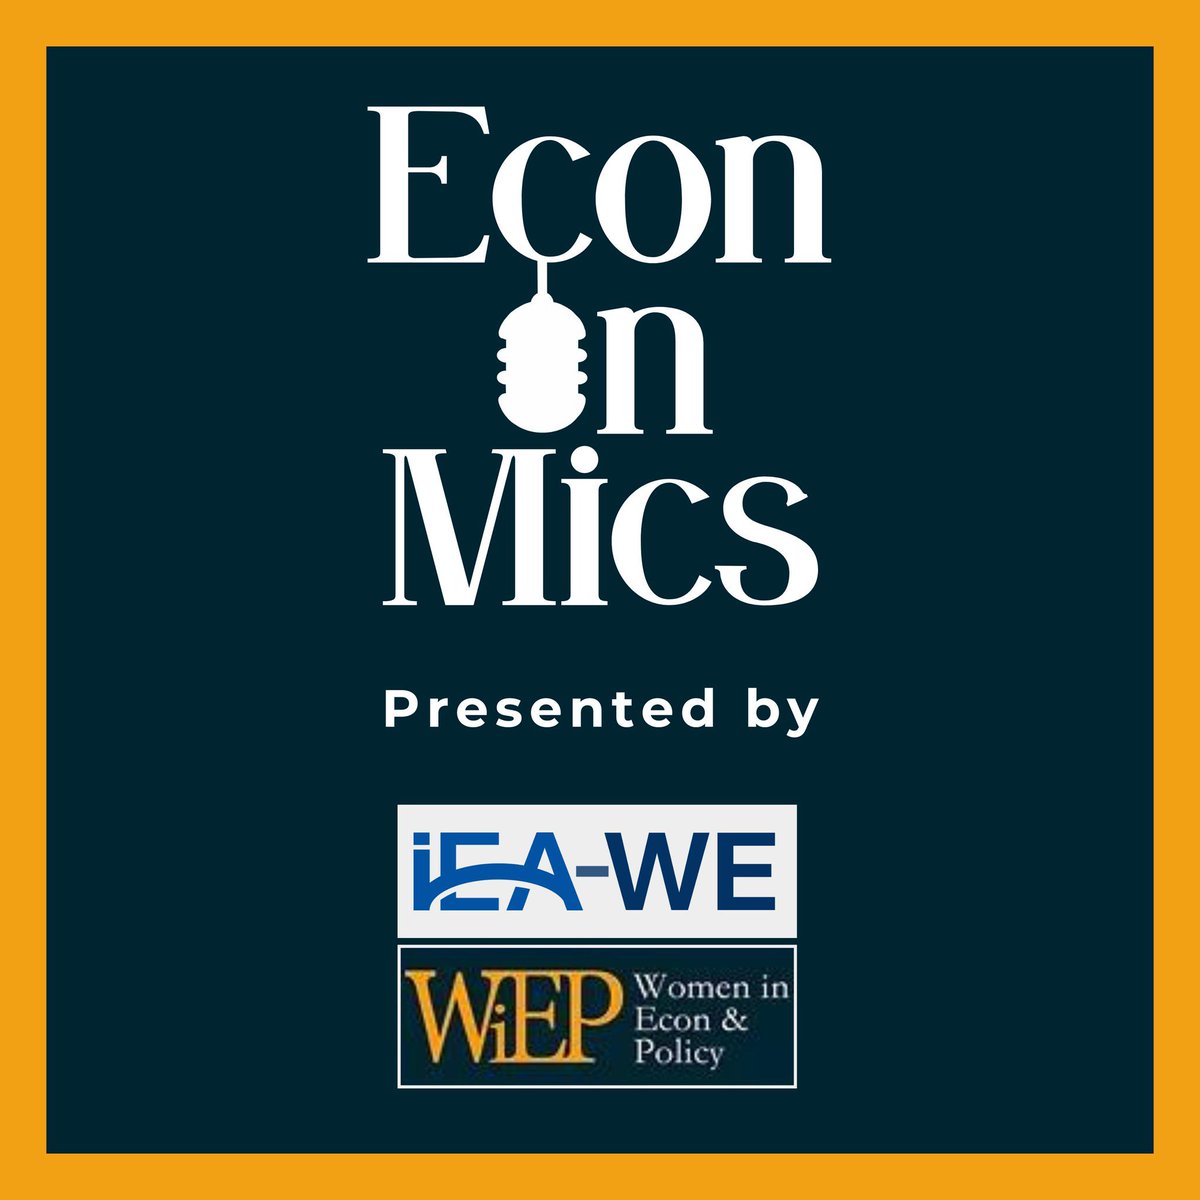 Joining us on the ‘Econ-on-Mics' 🎙️ podcast from 🇱🇰Sri Lanka, is Nisha Arunatilake @ArunatilakeN On Episode 4, Nisha discusses her research focused on 💼 #women’s access to decent #work, guided by Lakmini Fernando @lakmini09! 🔔 Coming May 6 #EconTwitter